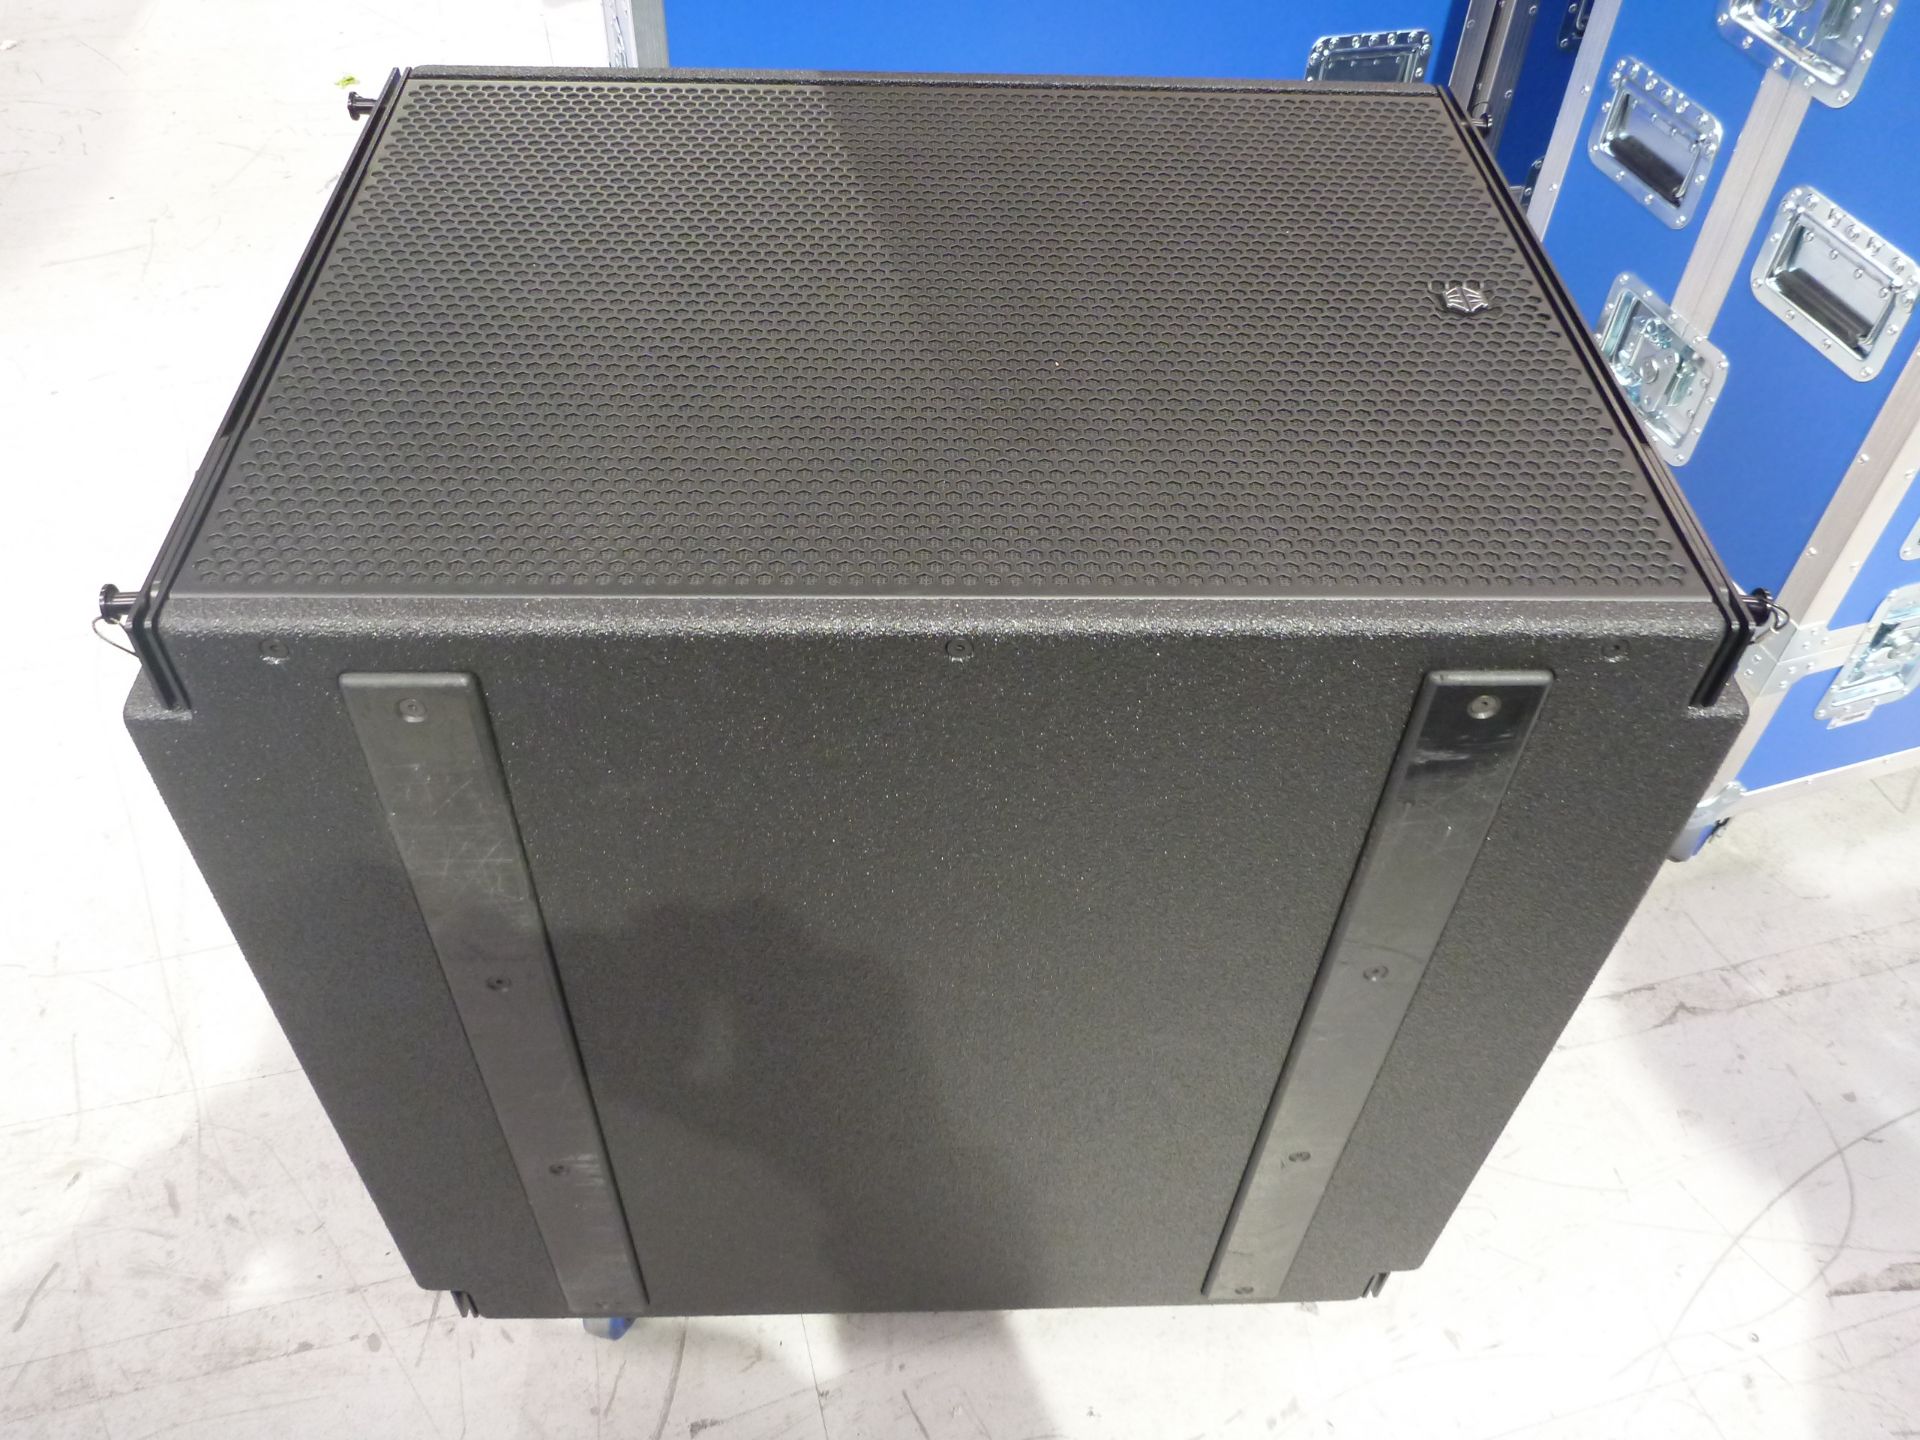 EM Acoustics ST-215 Dual 15" Flyable High Power Subwoofer, Includes padded cover, S/N ST2150819/020 - Image 6 of 7